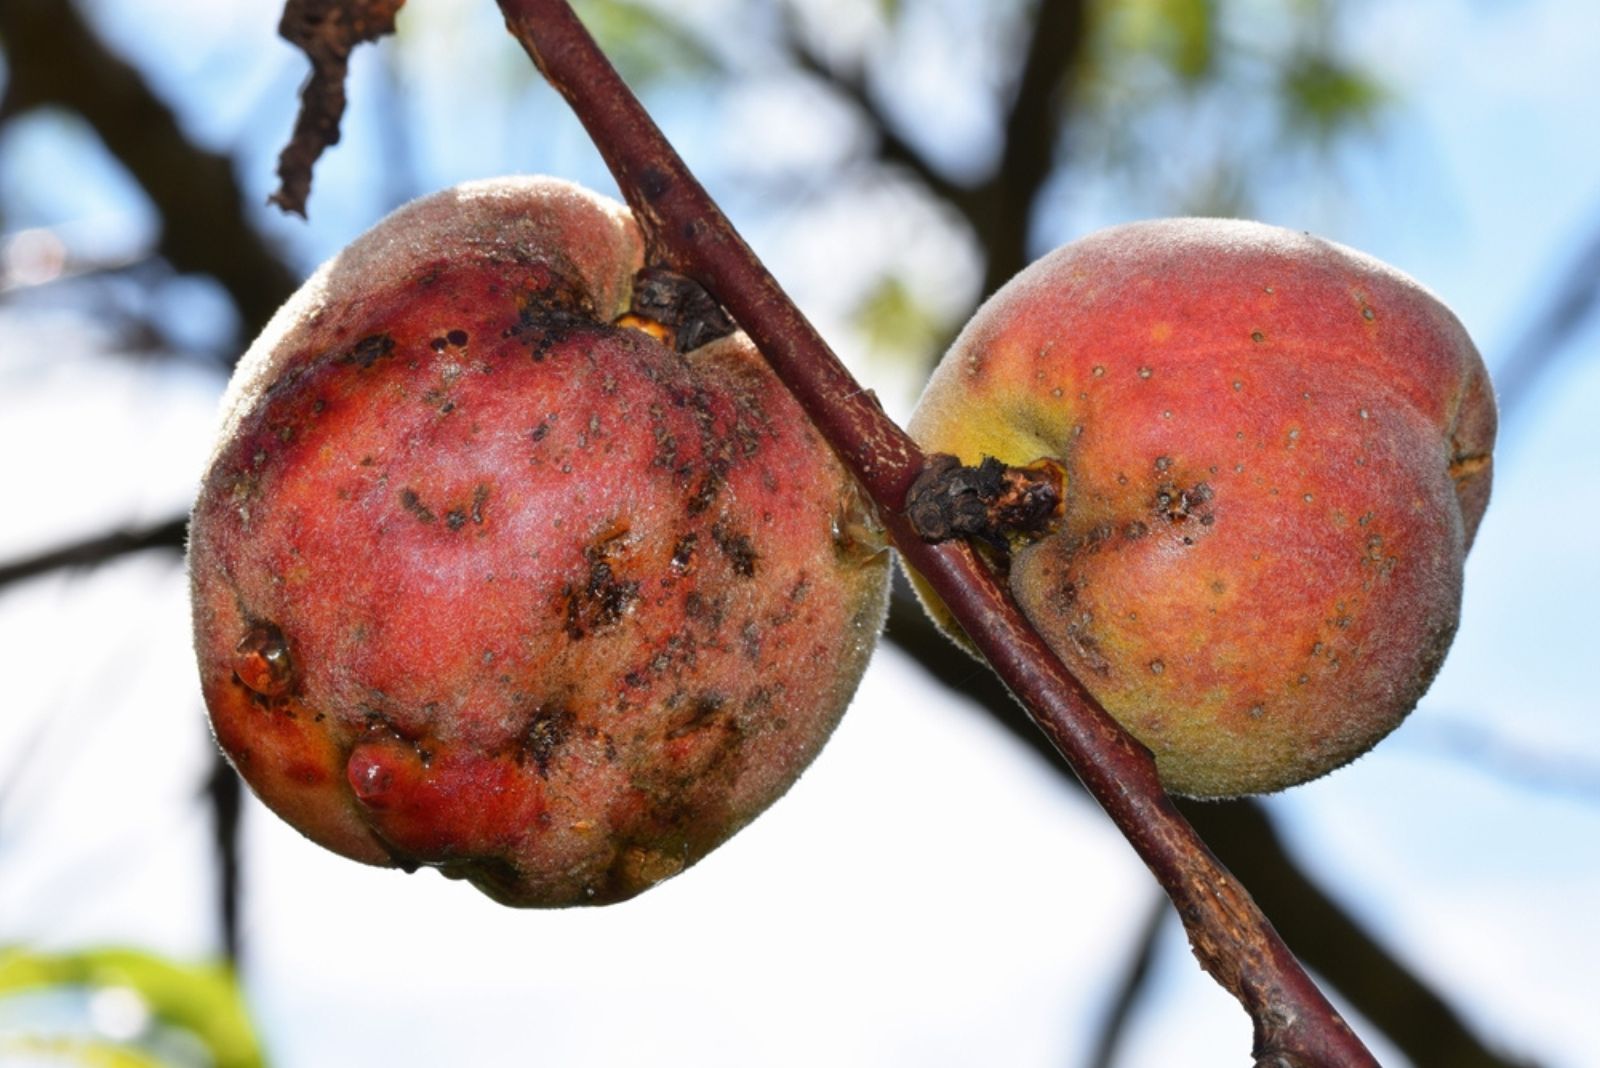 Ripening peaches on a tree